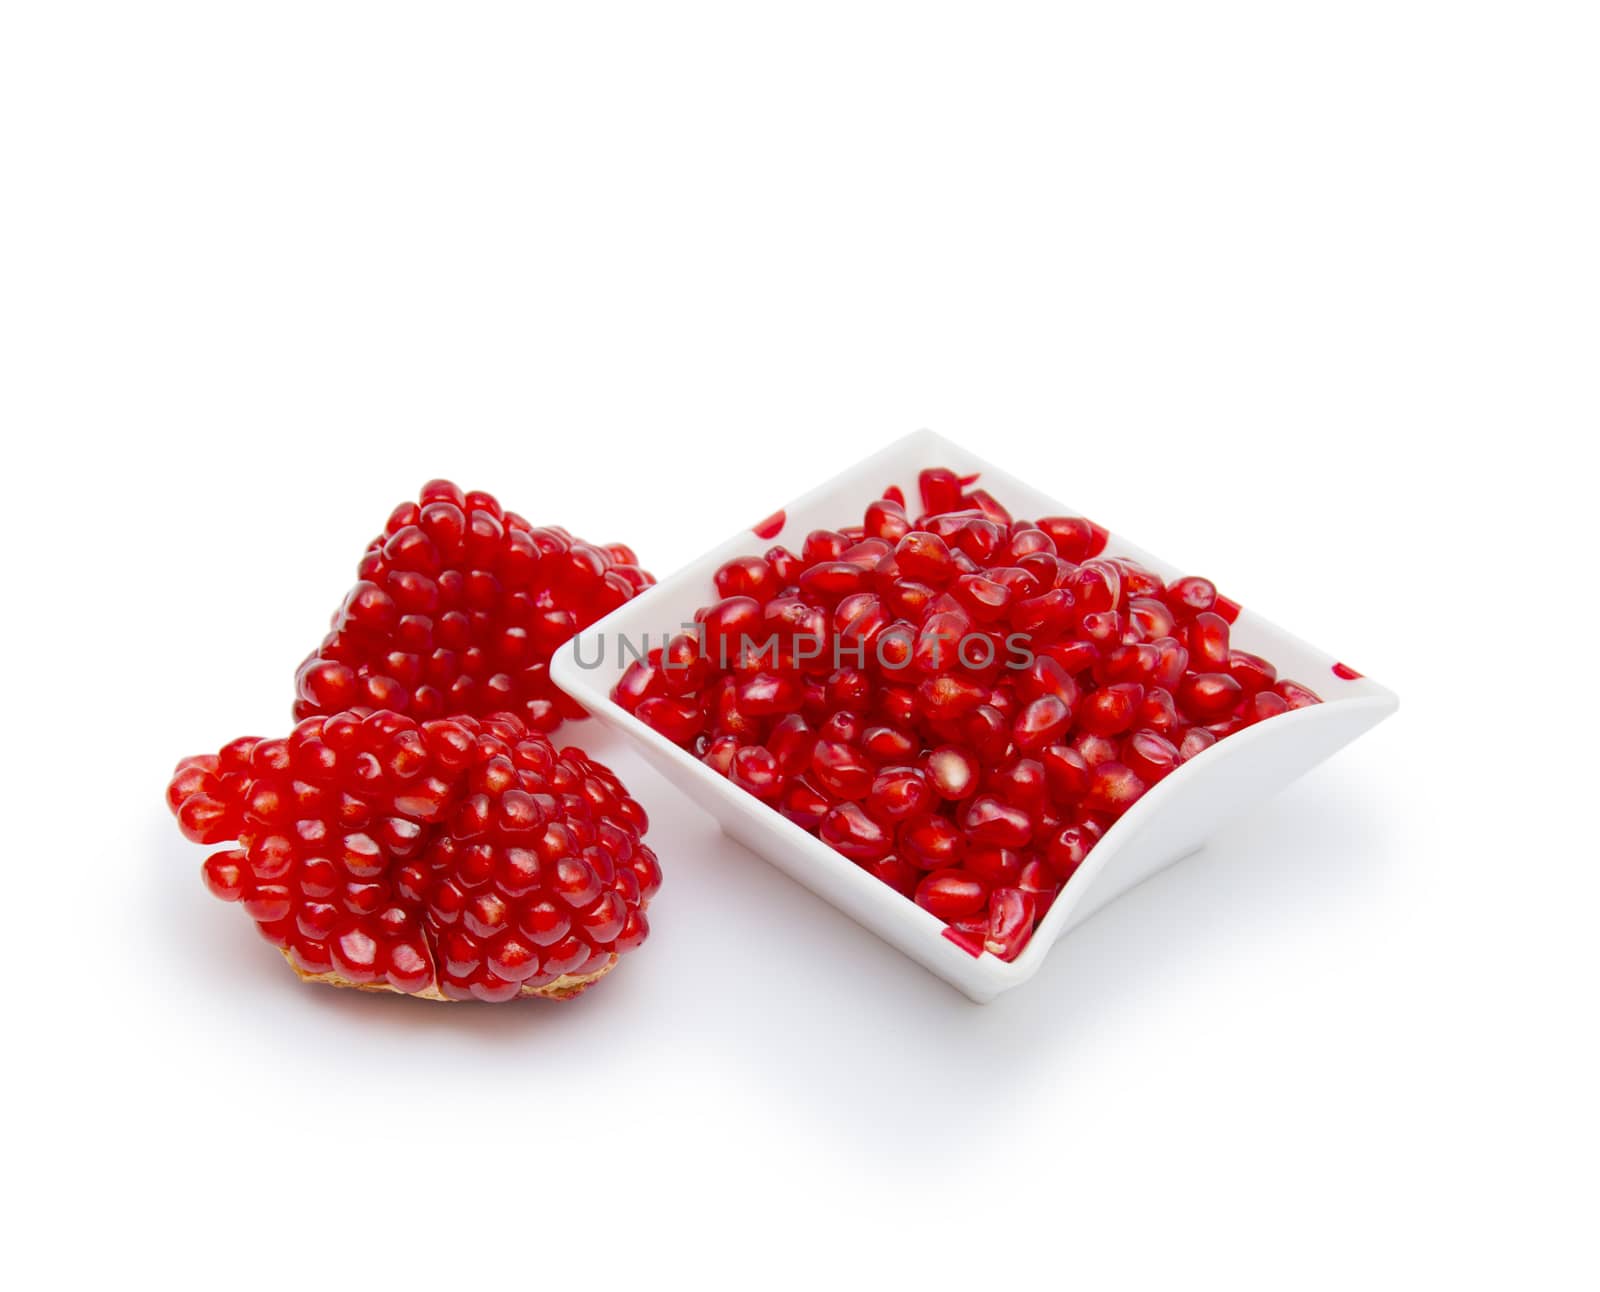 Loose pomegranate seeds in a white bowl